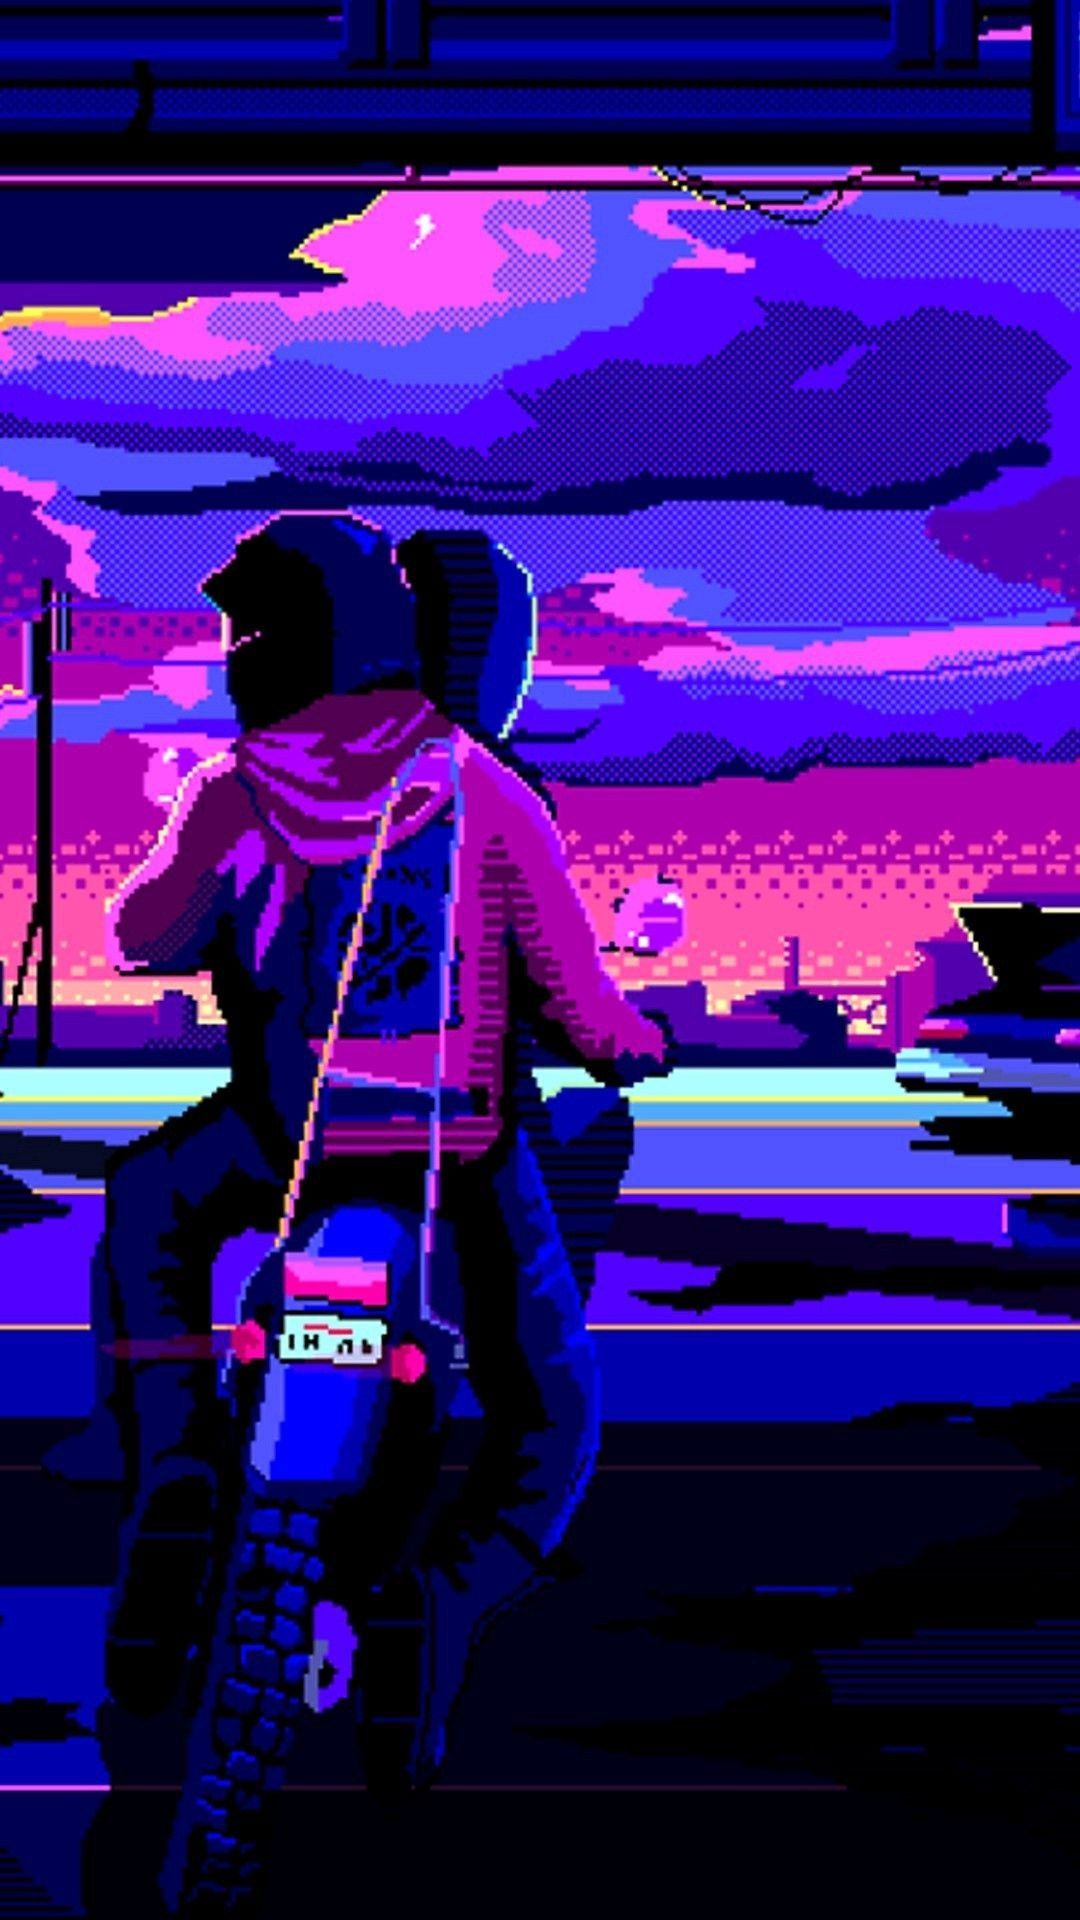 Vaporwave Ps4 Aesthetic Anime Wallpapers Wallpaper Cave